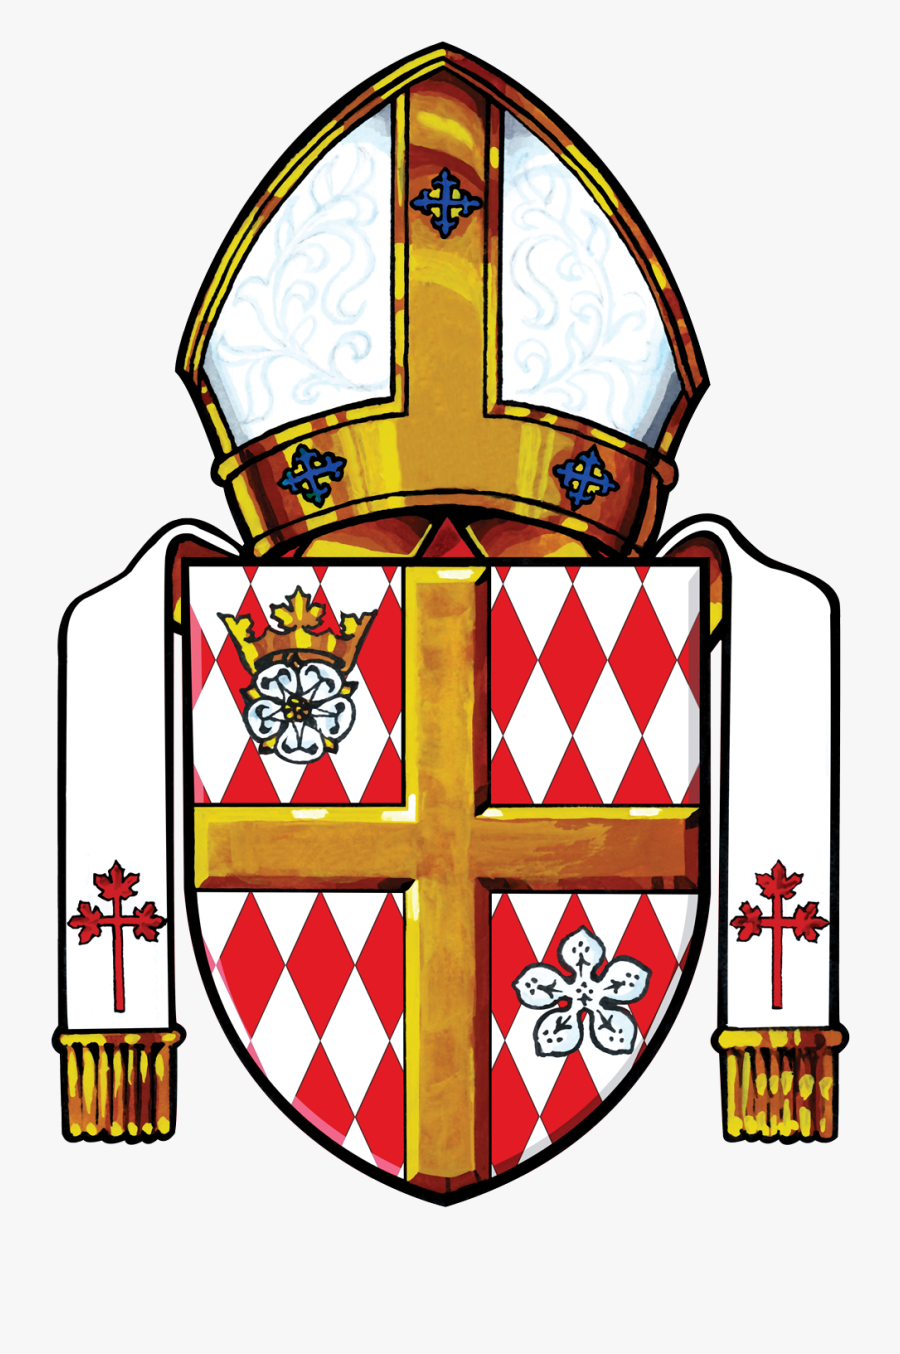 Roman Catholic Diocese Of Hamilton, Ontario Clipart - Youth Ministry Png, Transparent Clipart